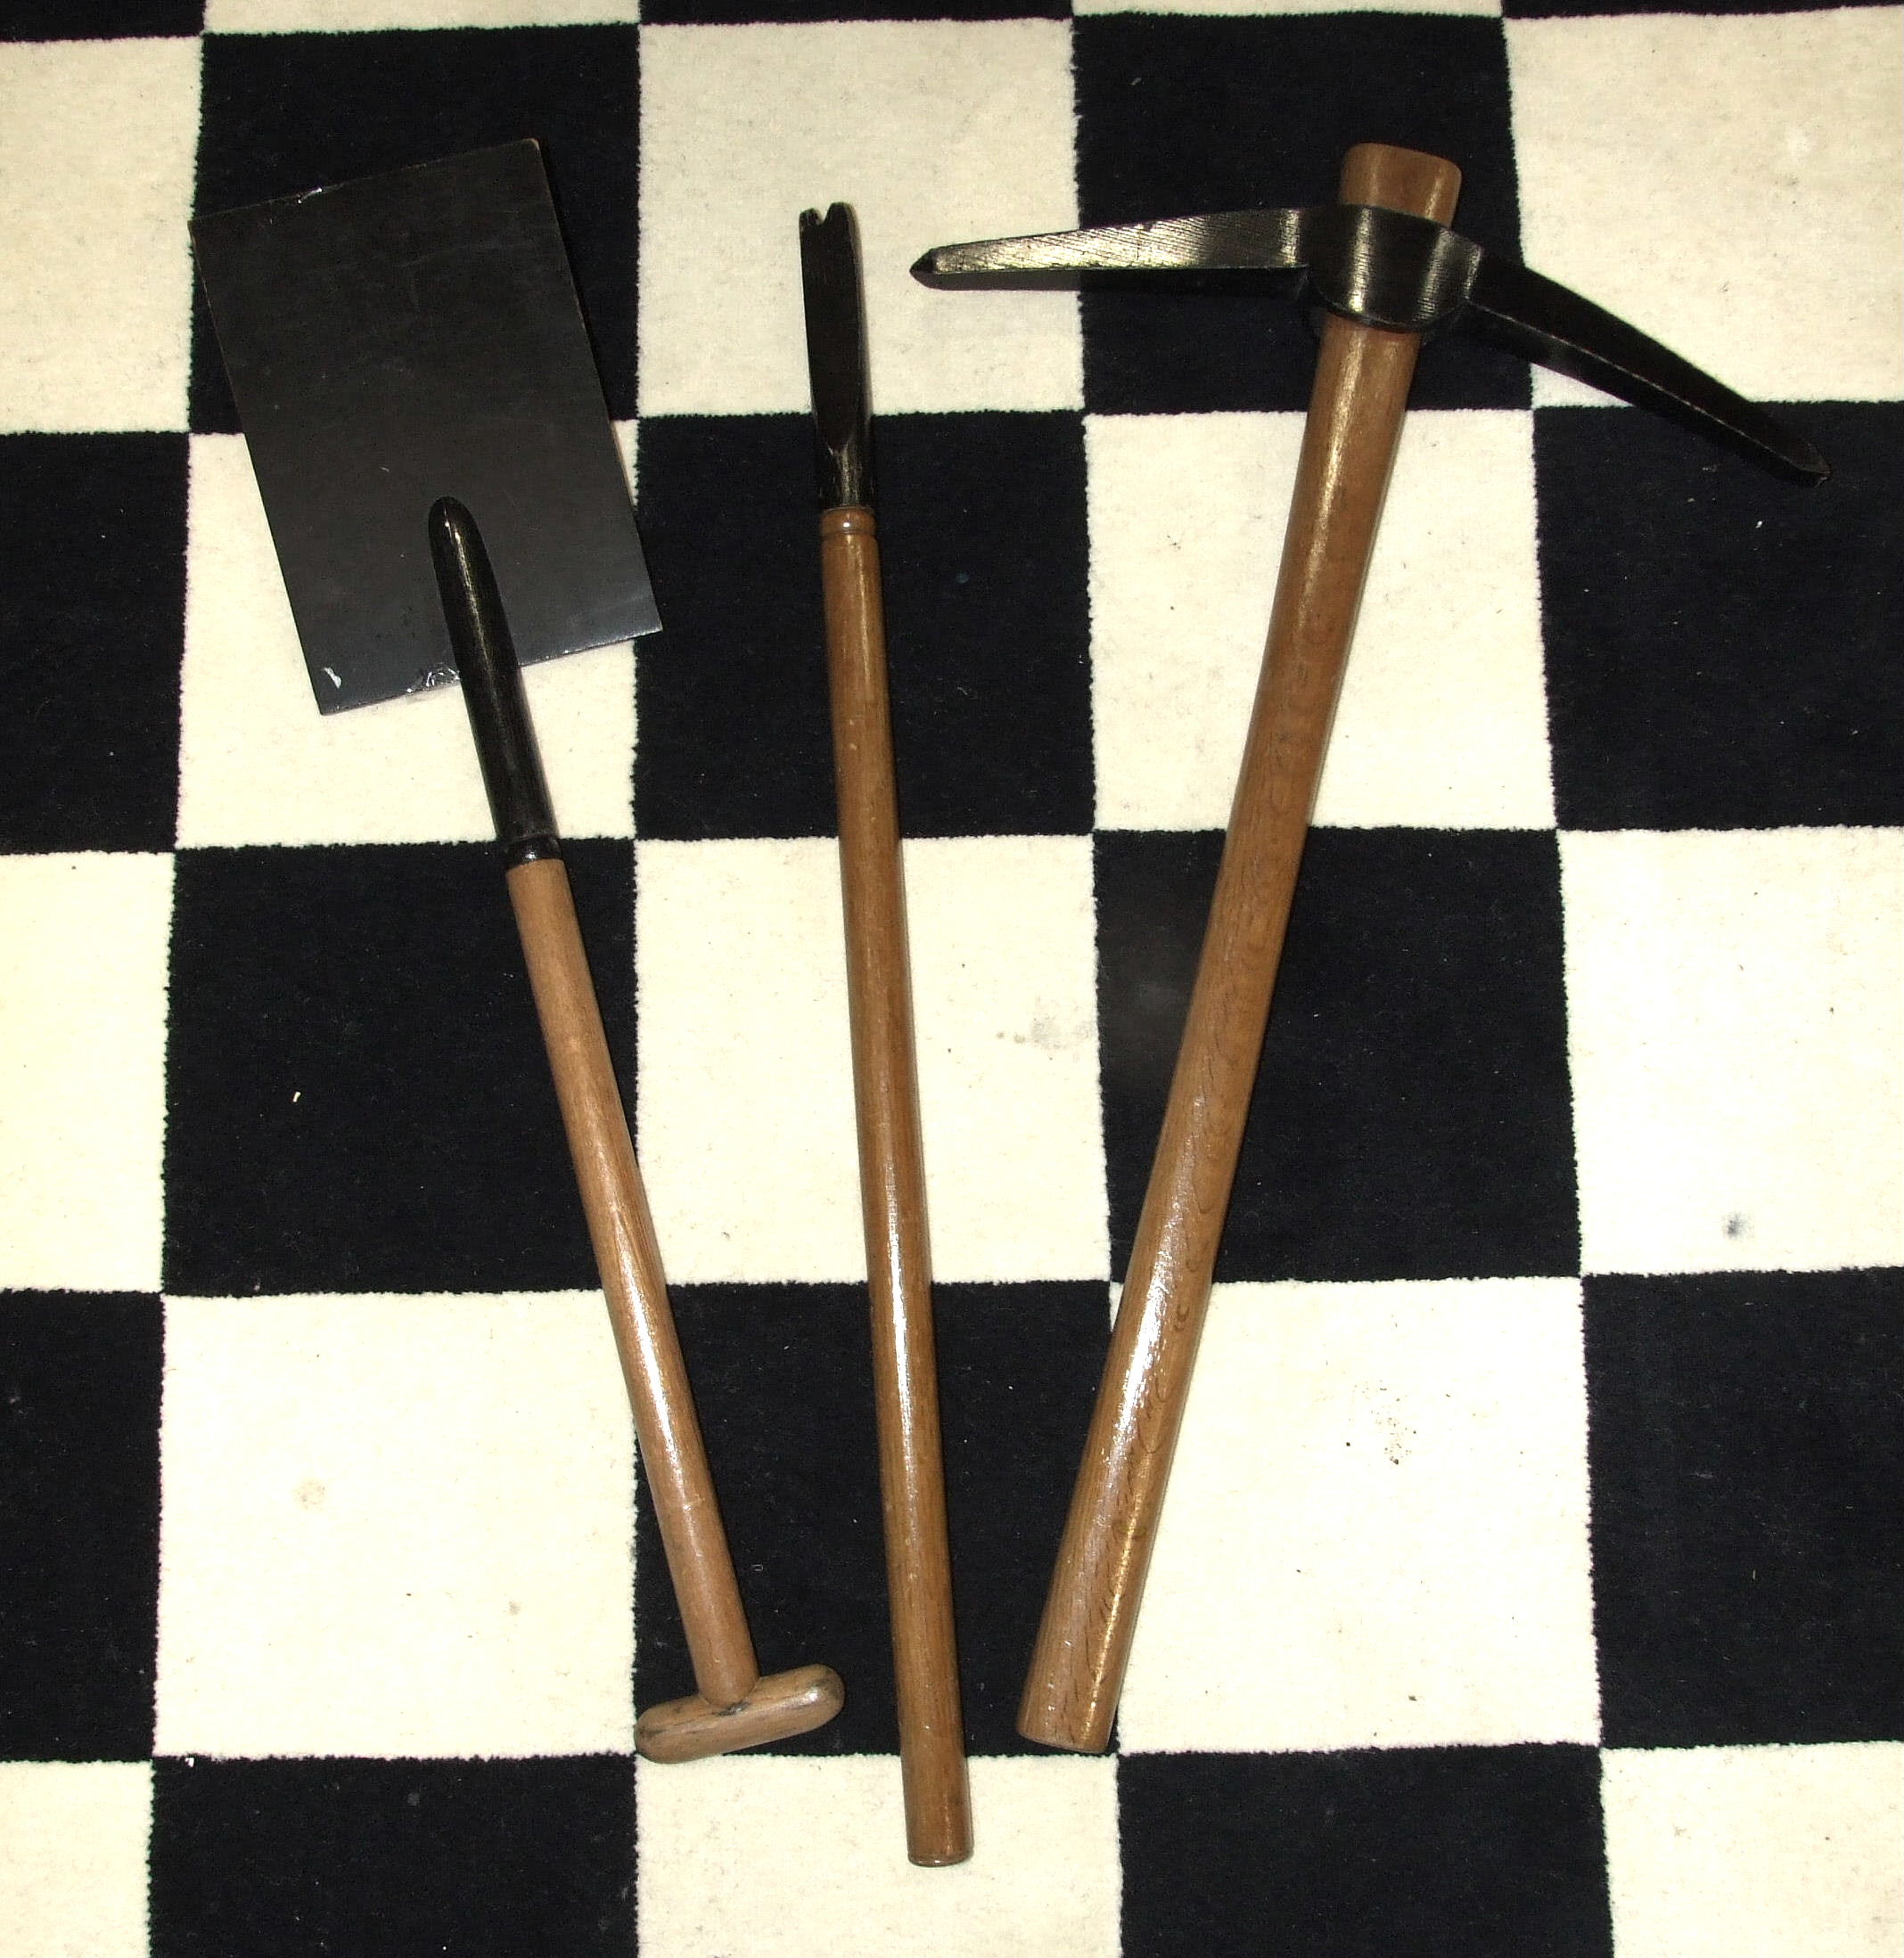 A set of Masonic HRA implements of labour, of painted and turned wood.